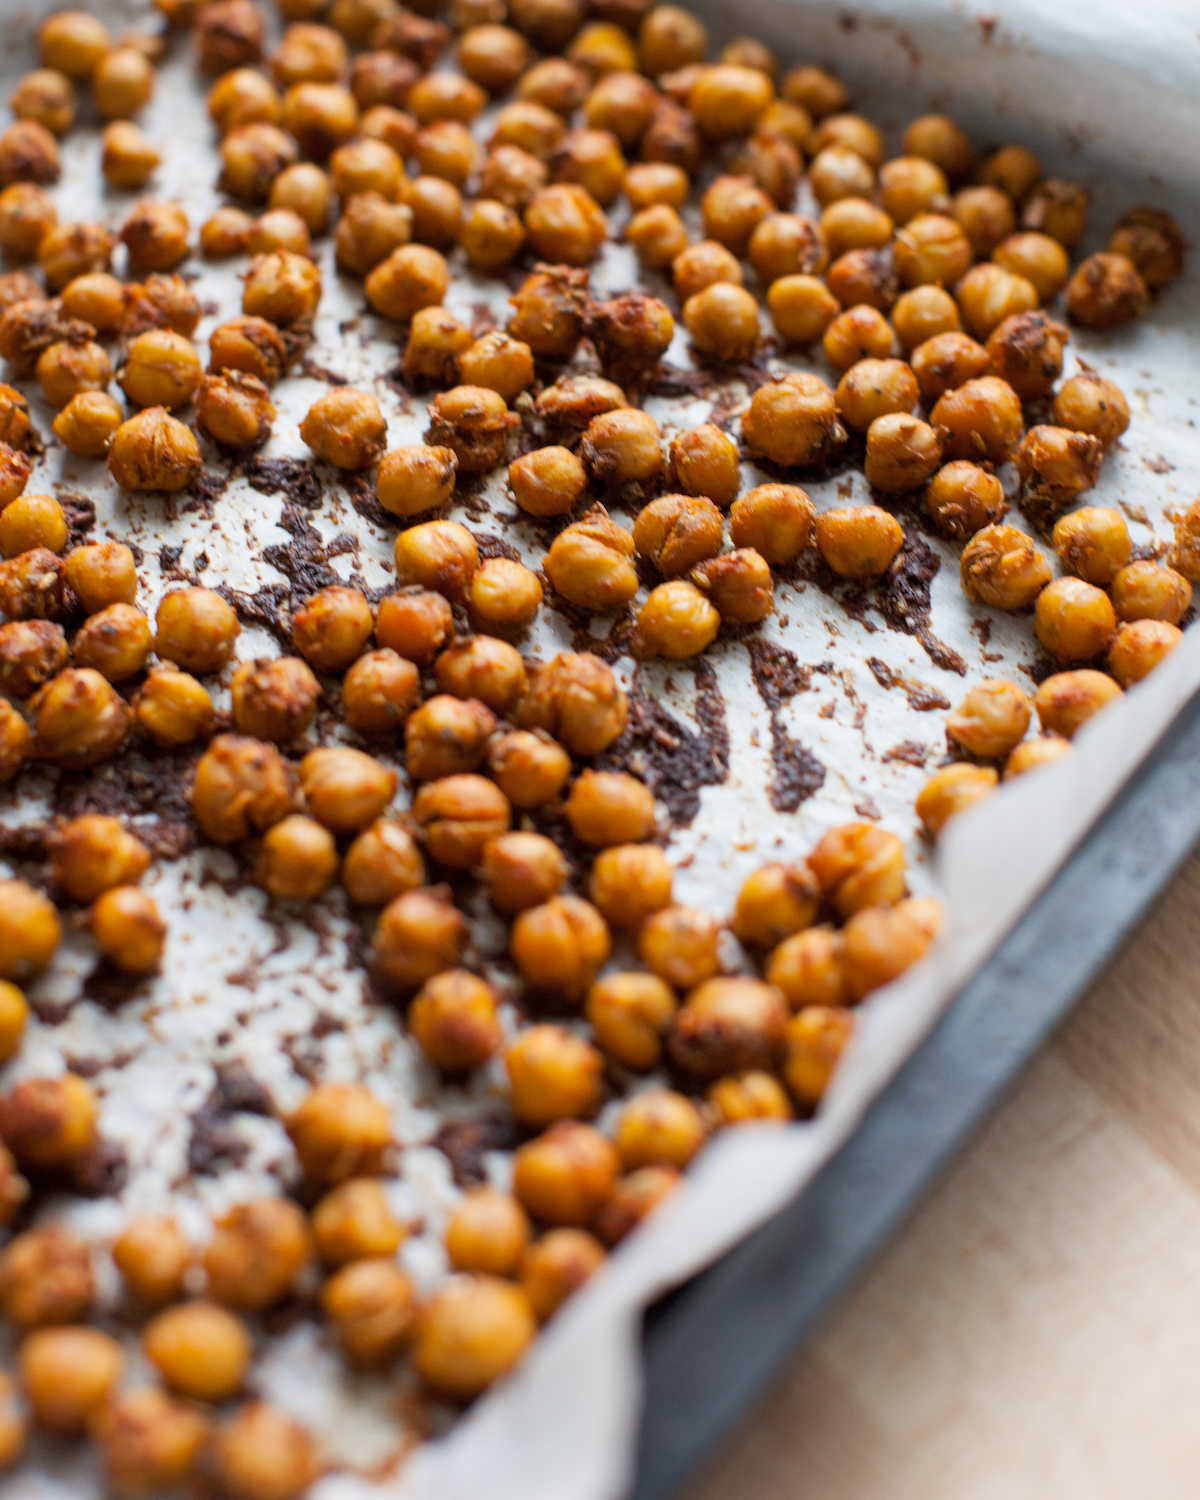 A side shot of a baking tray of roasted chickpeas.